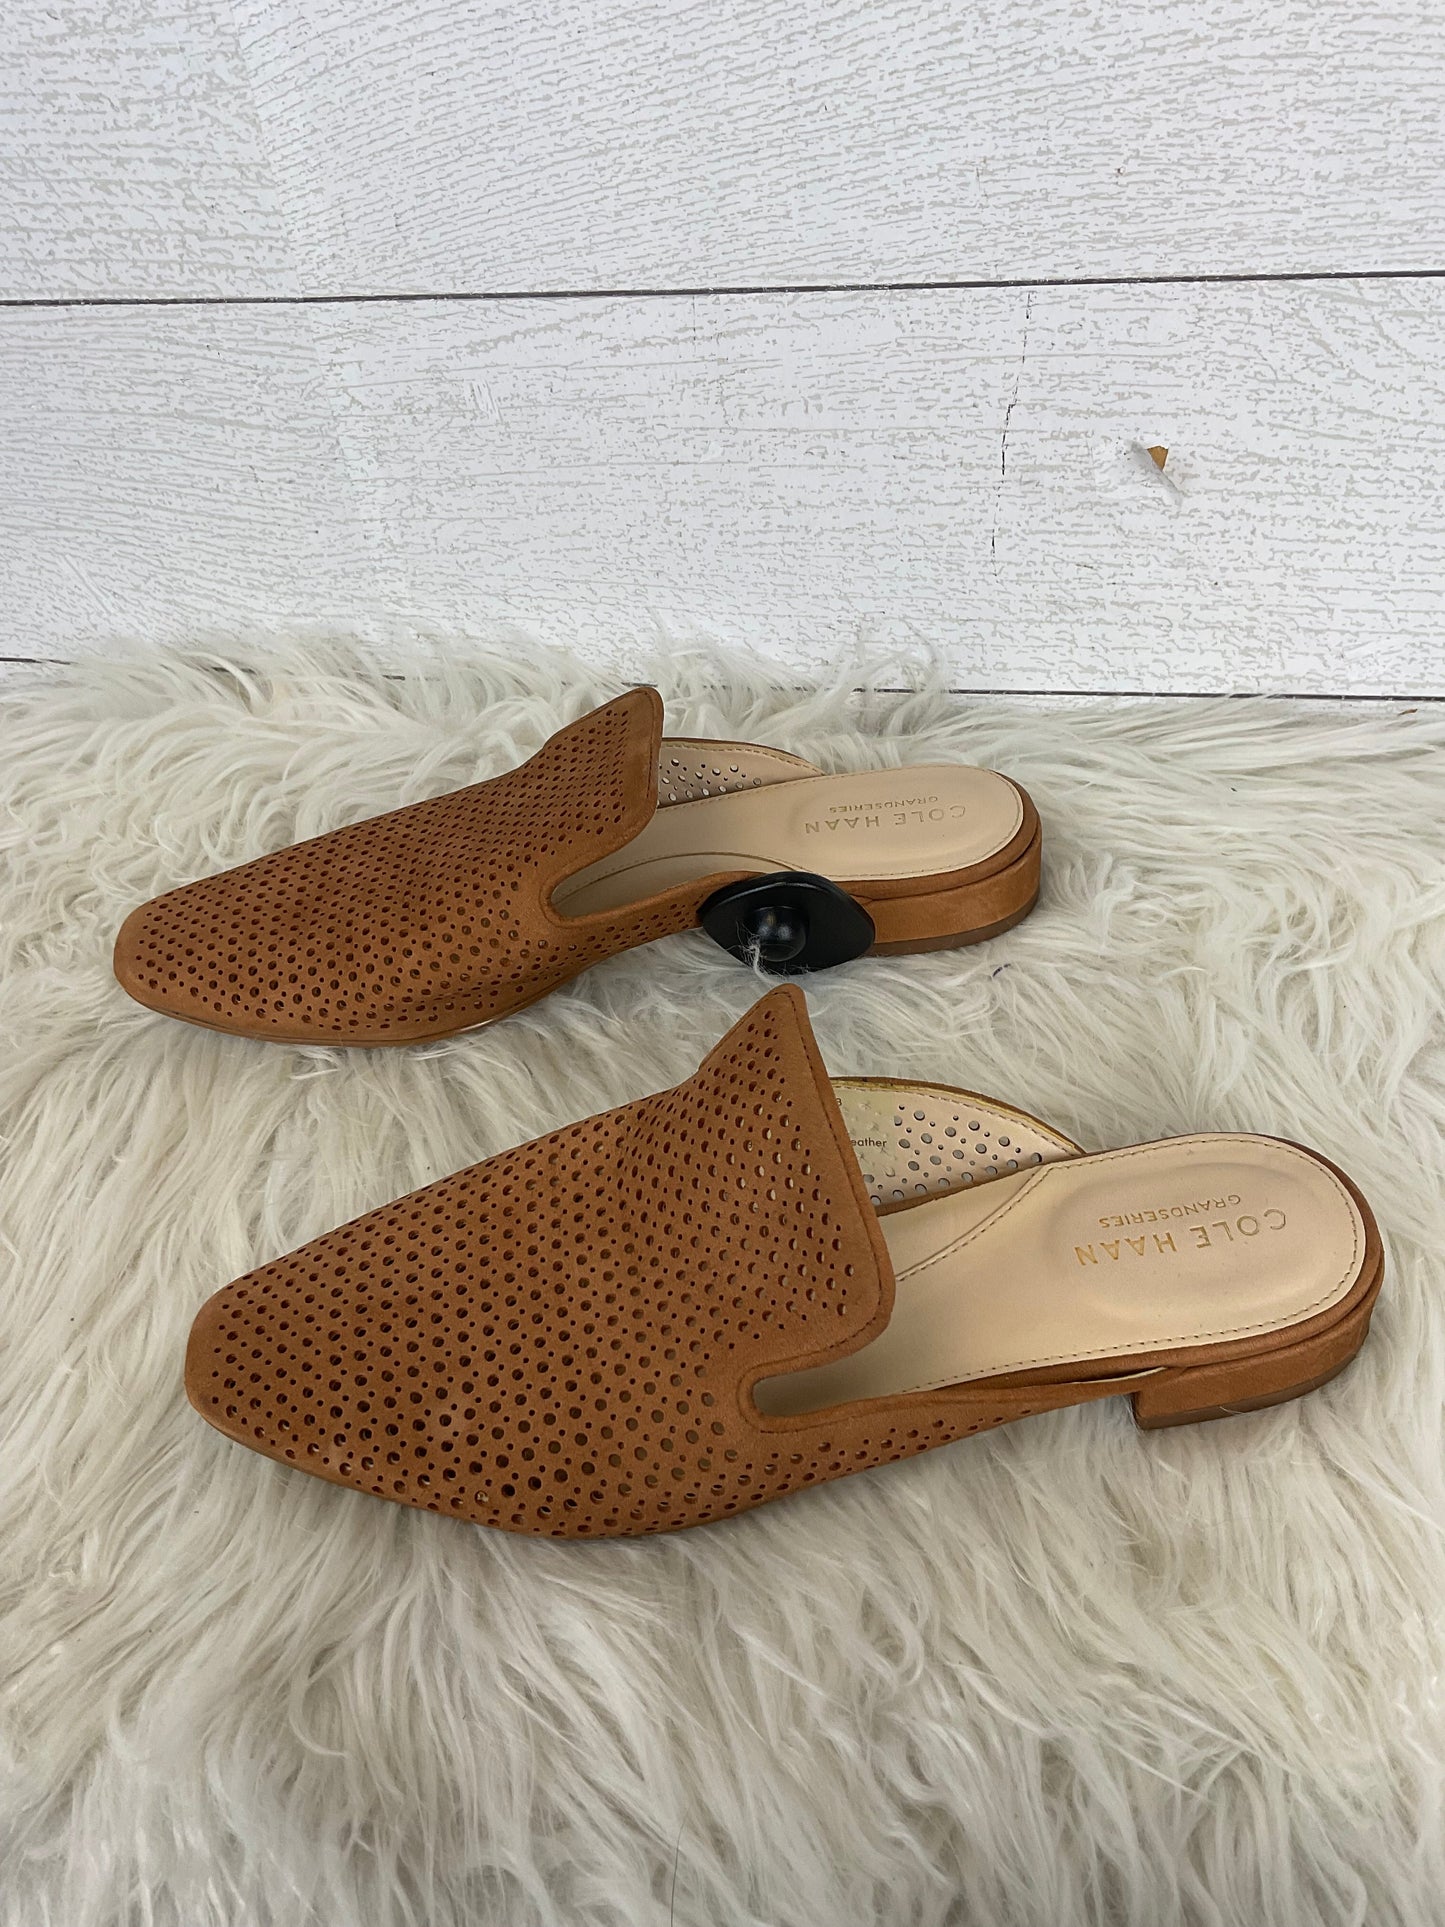 Shoes Flats By Cole-haan  Size: 8